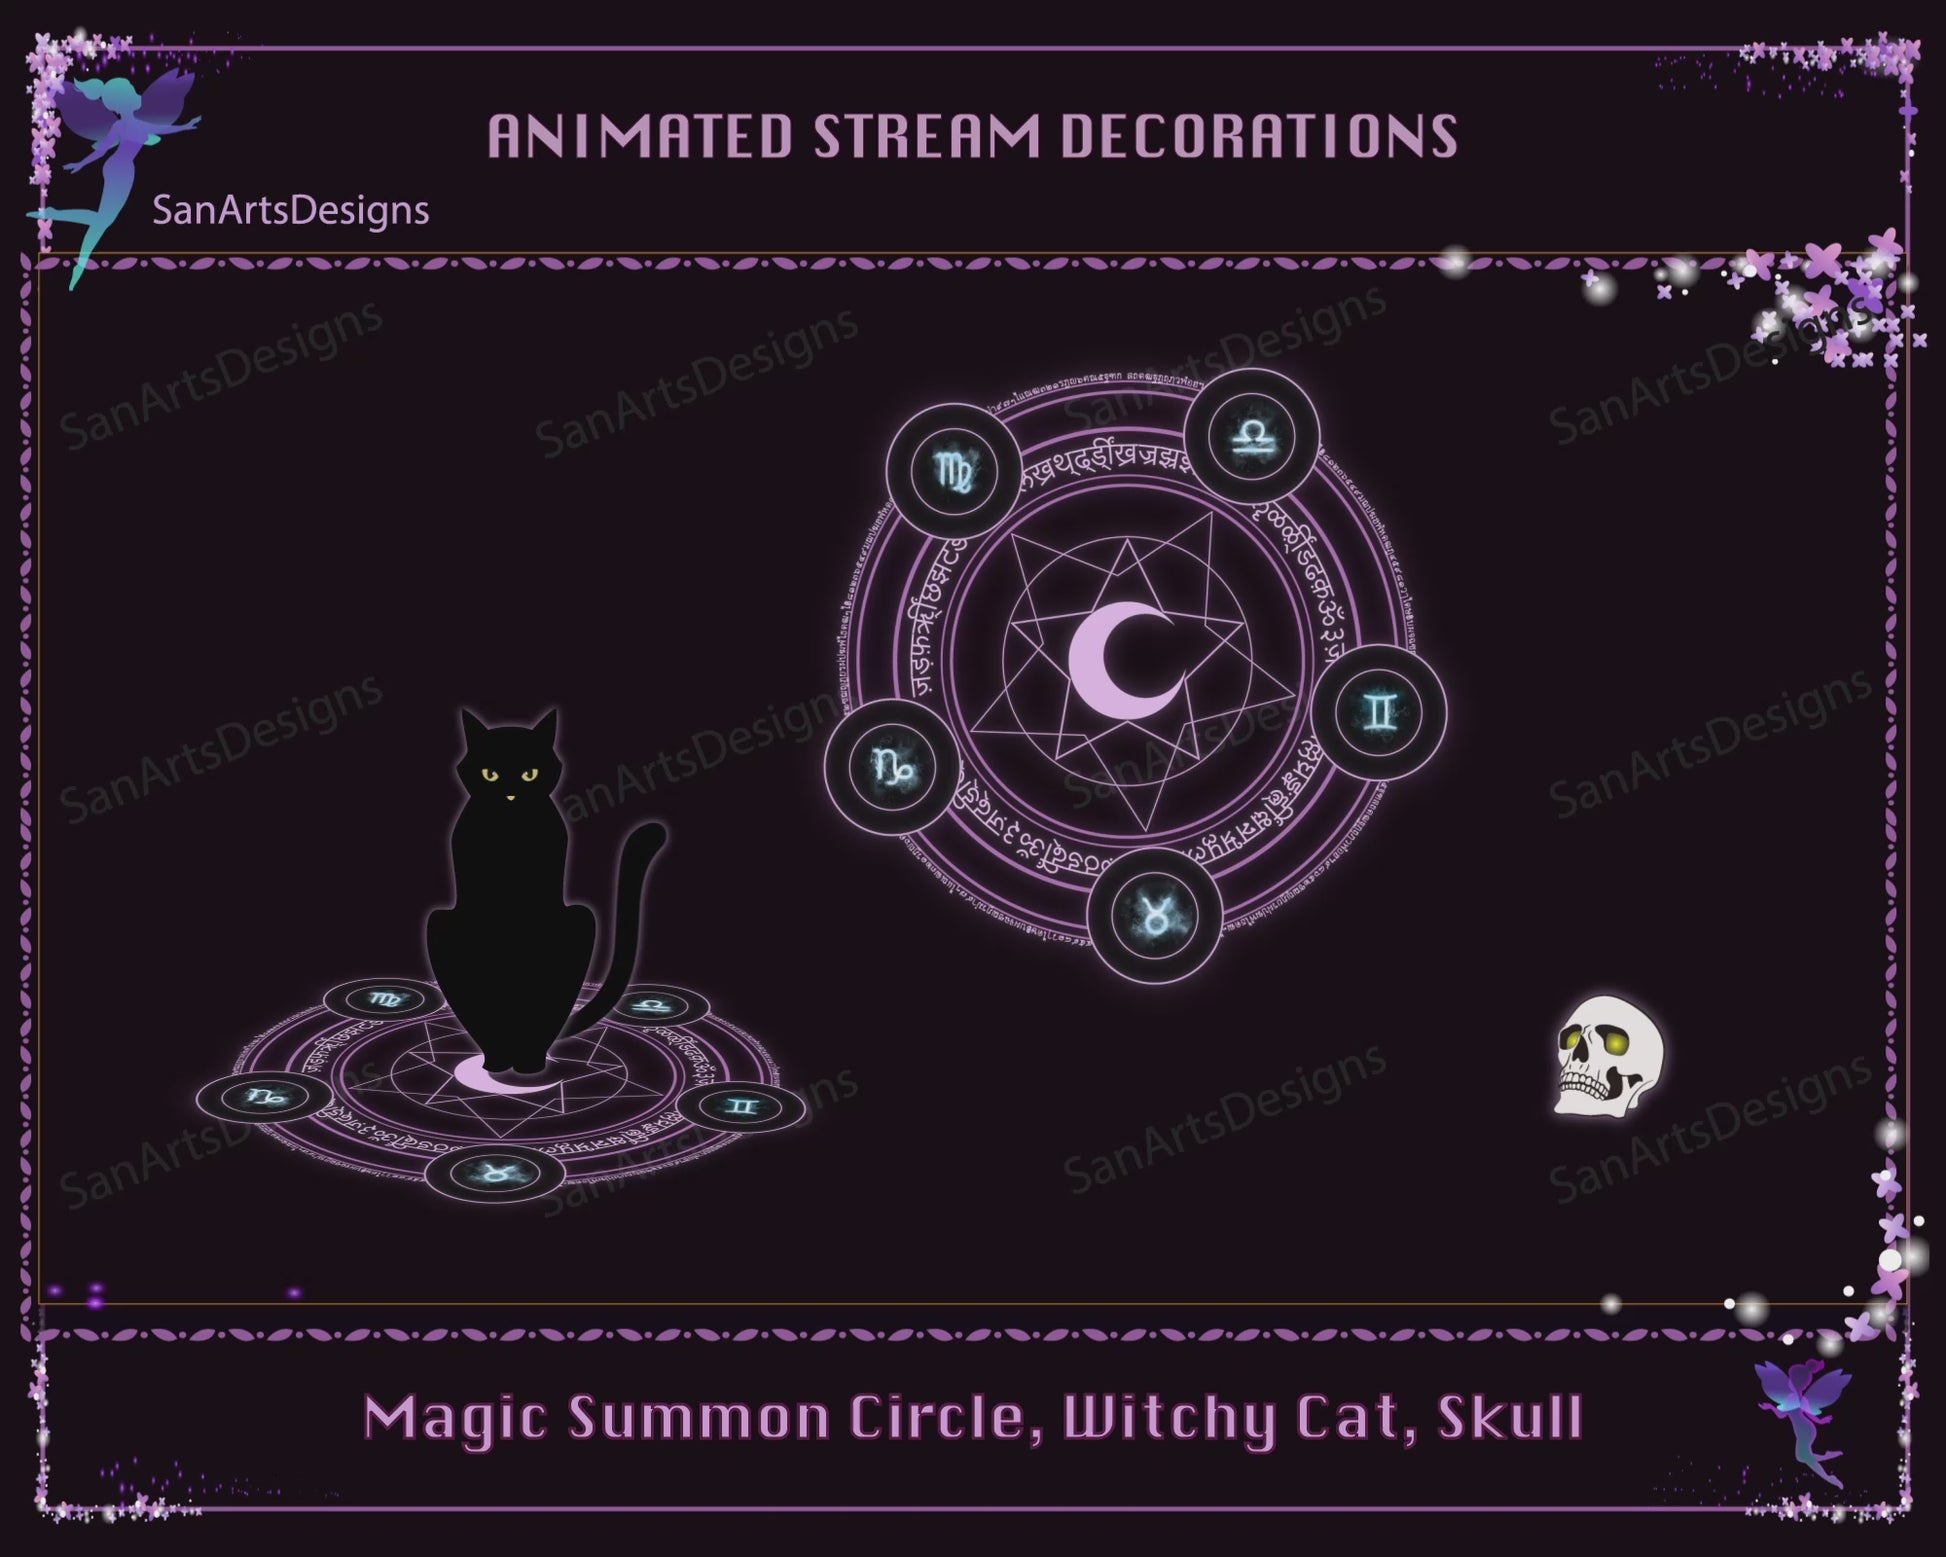 Animated Witchy Stuffs for Stream Decorations